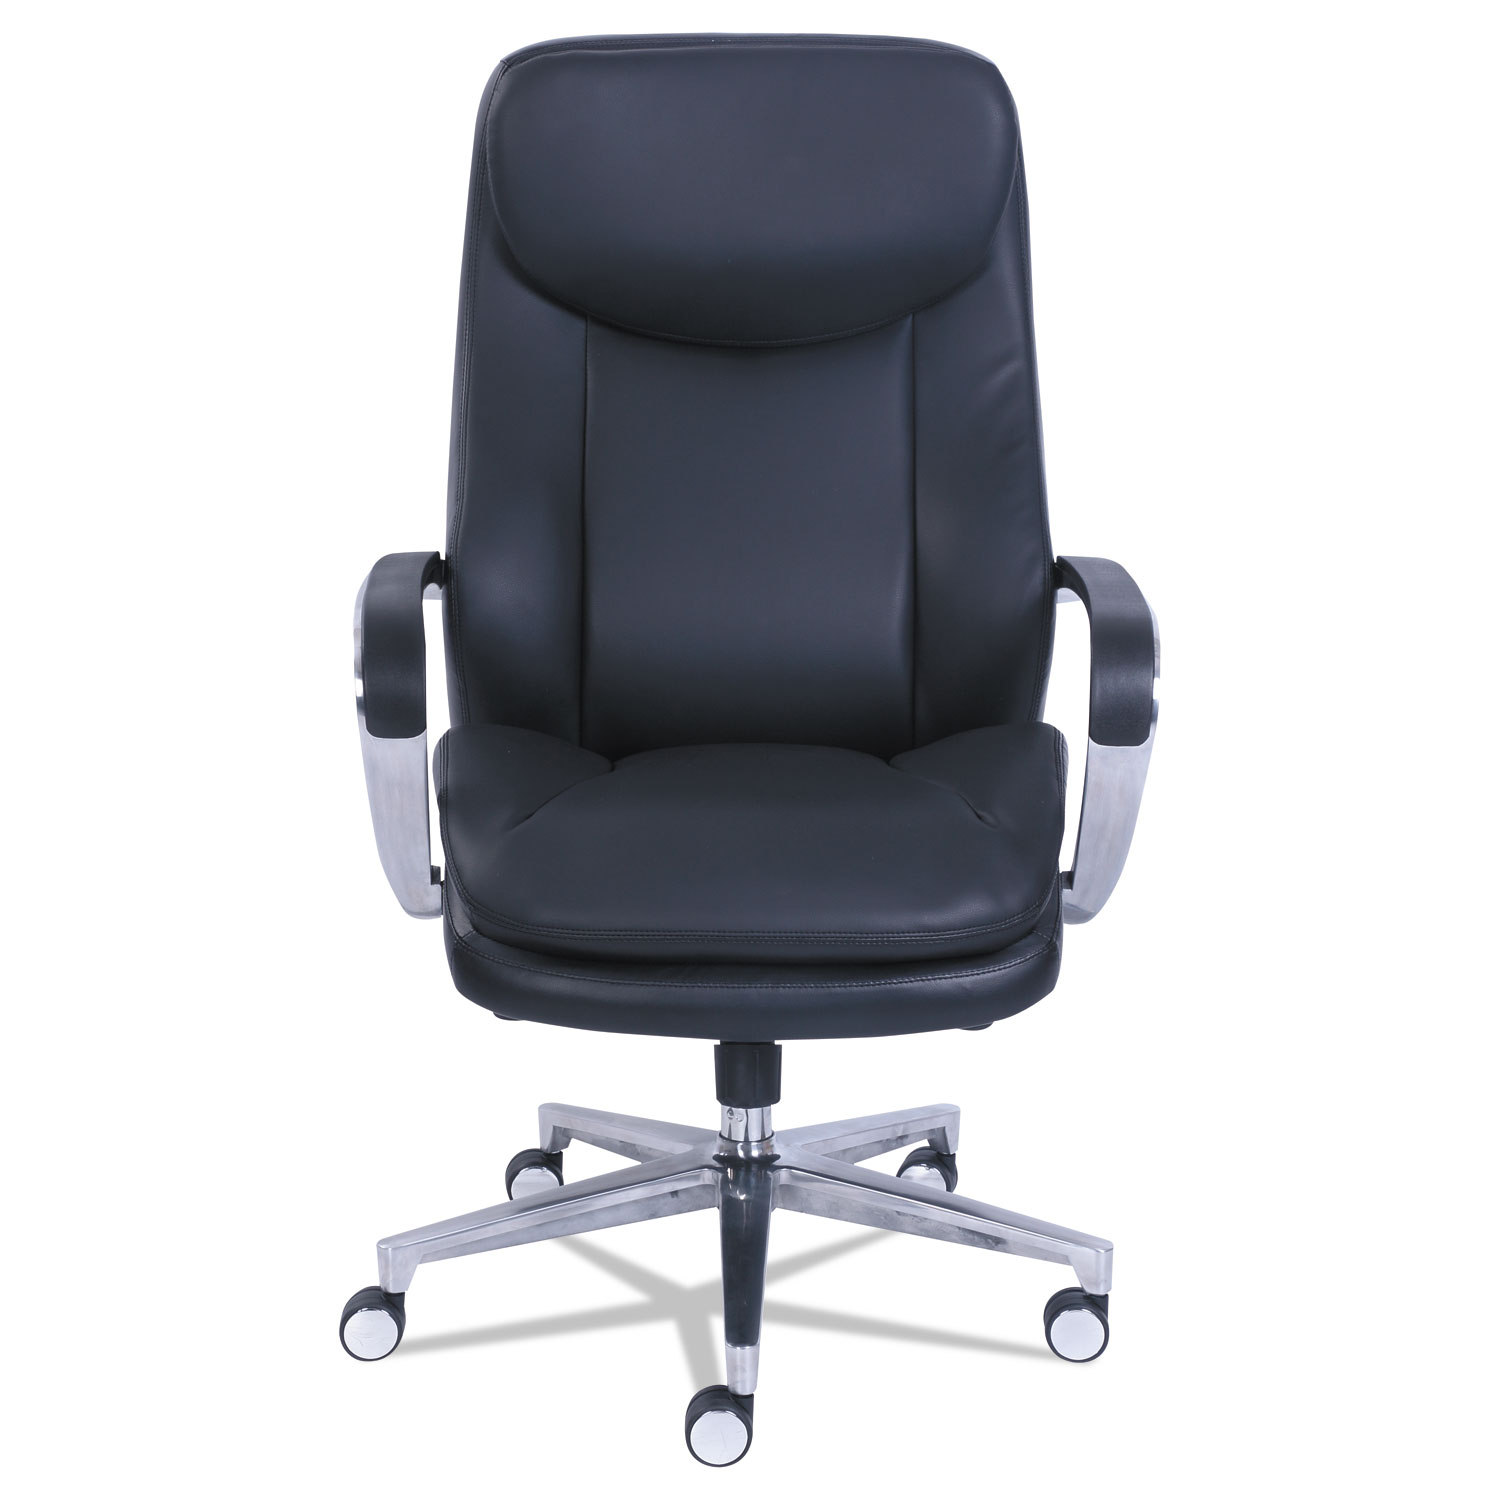 Commercial 2000 High-Back Executive Chair, Supports up to 300 lbs., Black Seat/Black Back, Silver Base